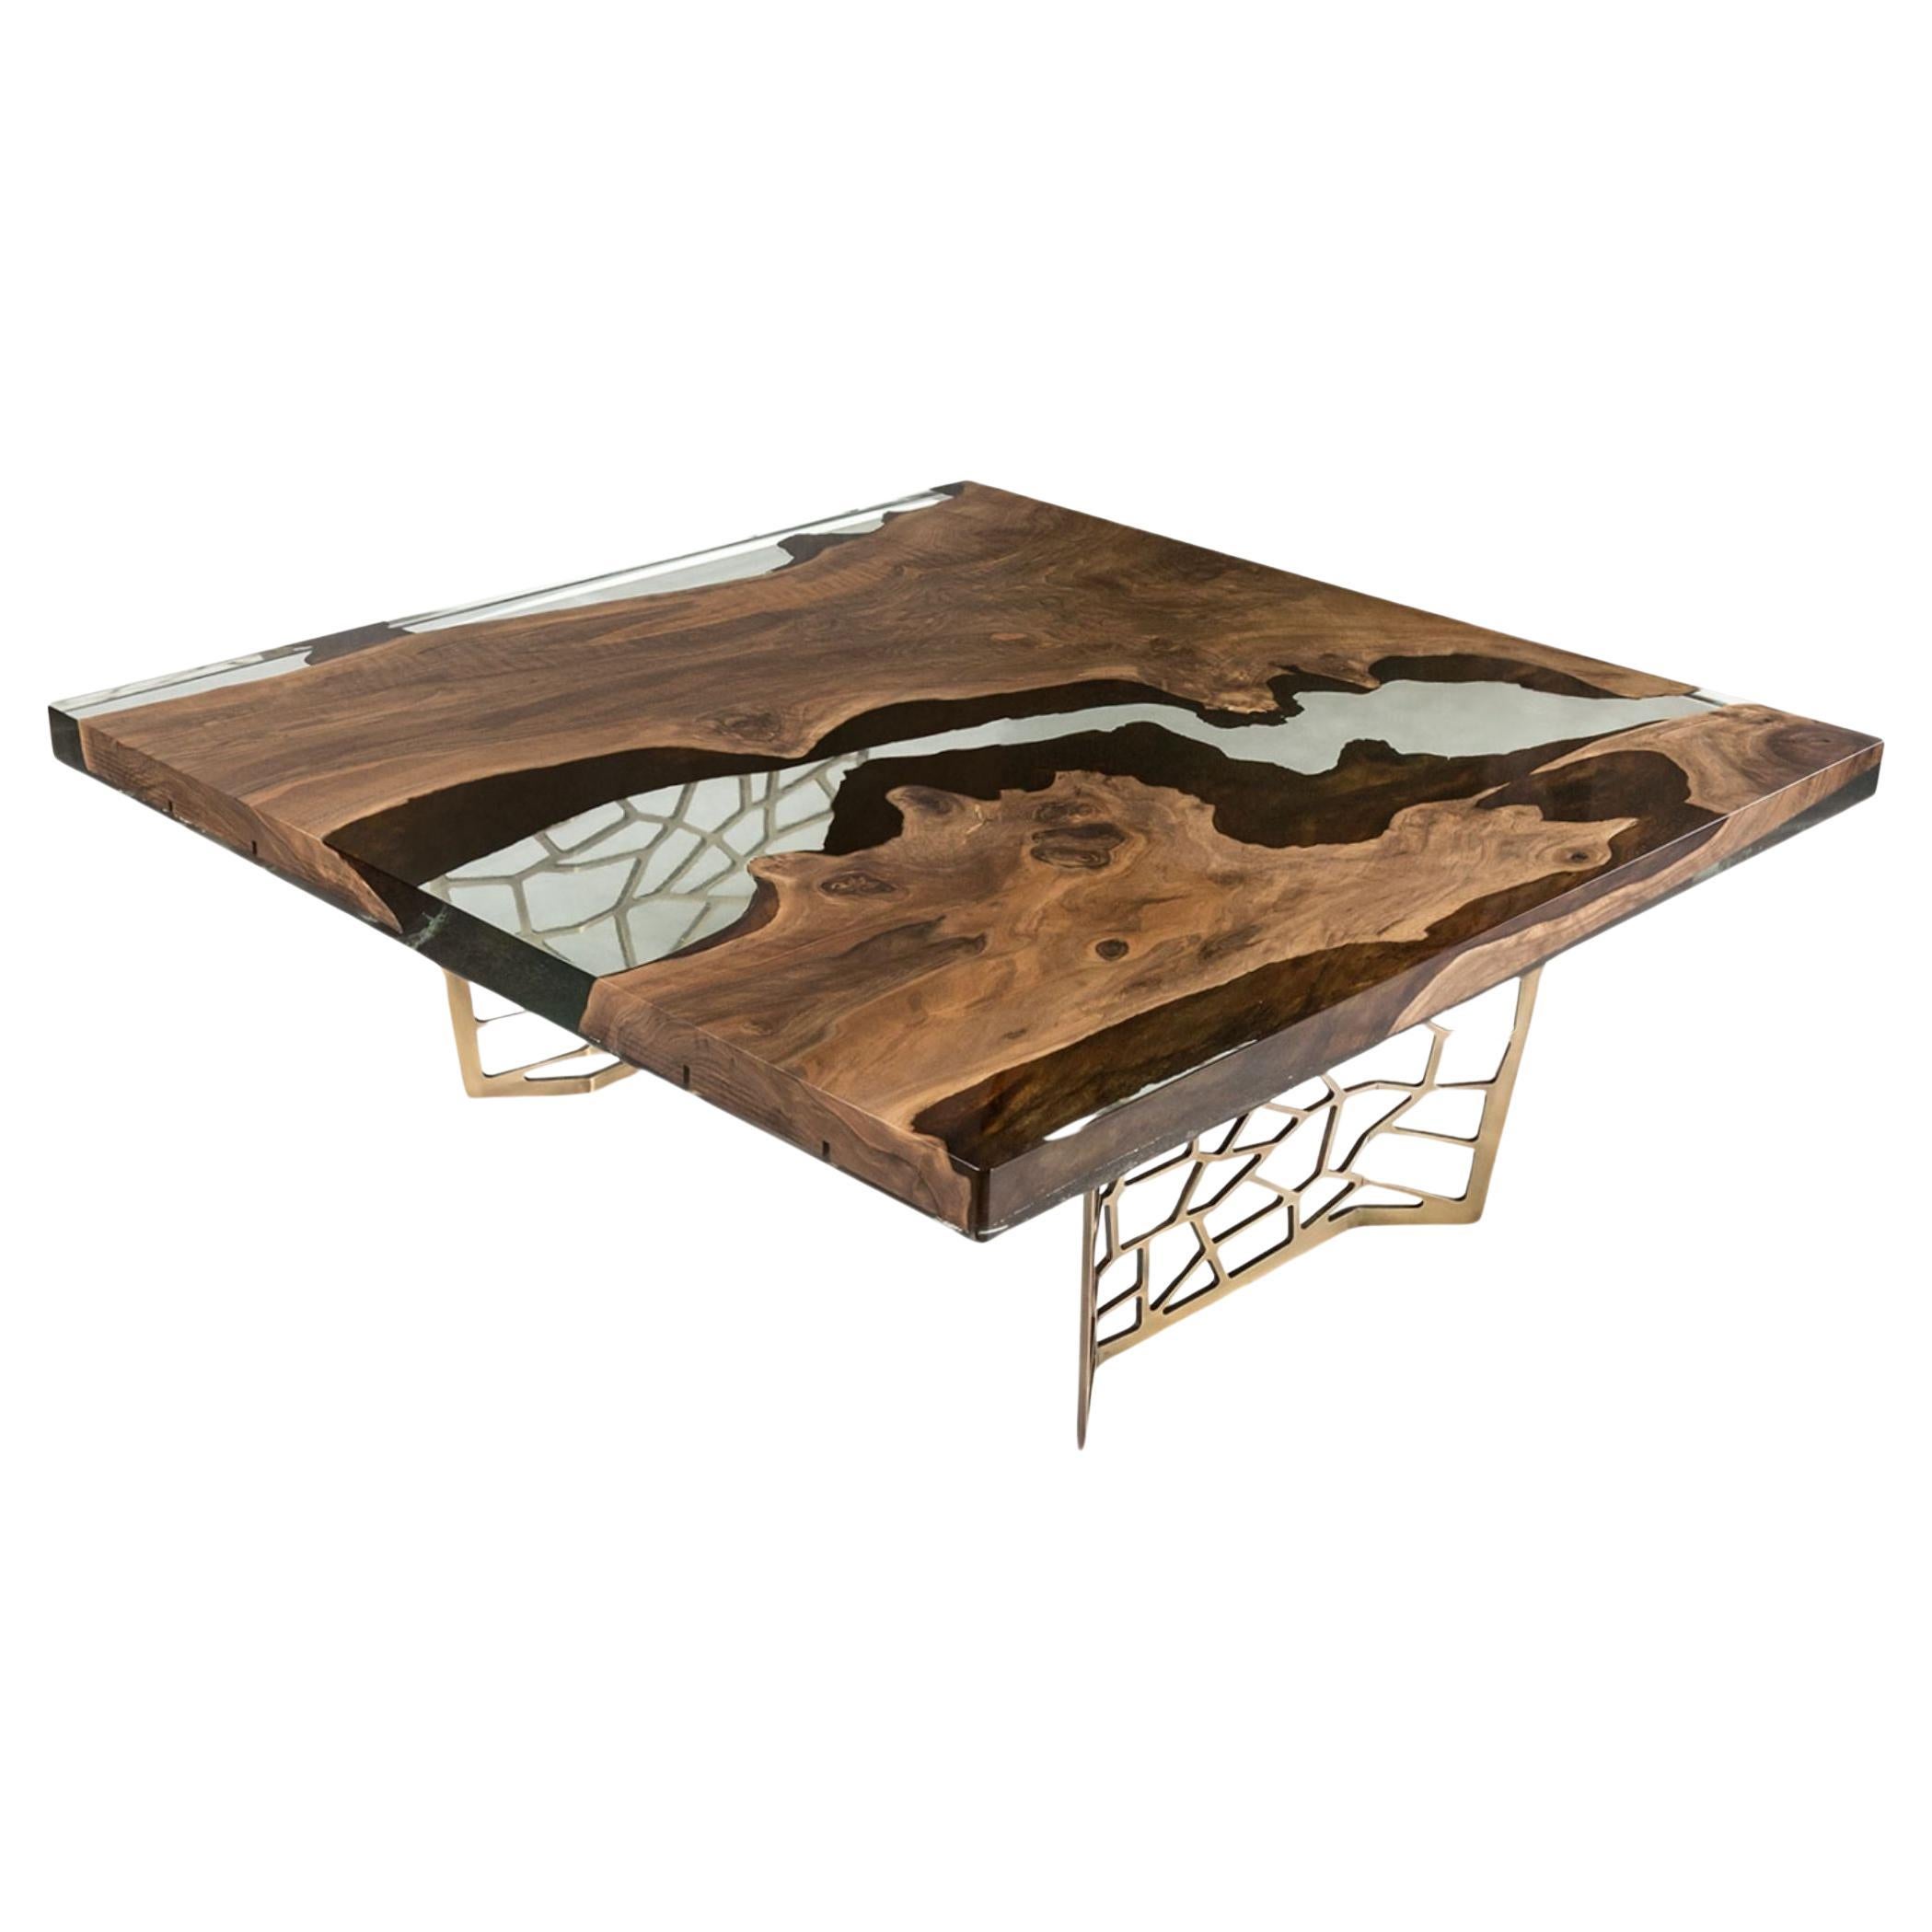 Efil Coffee Table: Great Aluminum Walnut Resin Coffee Table For Sale